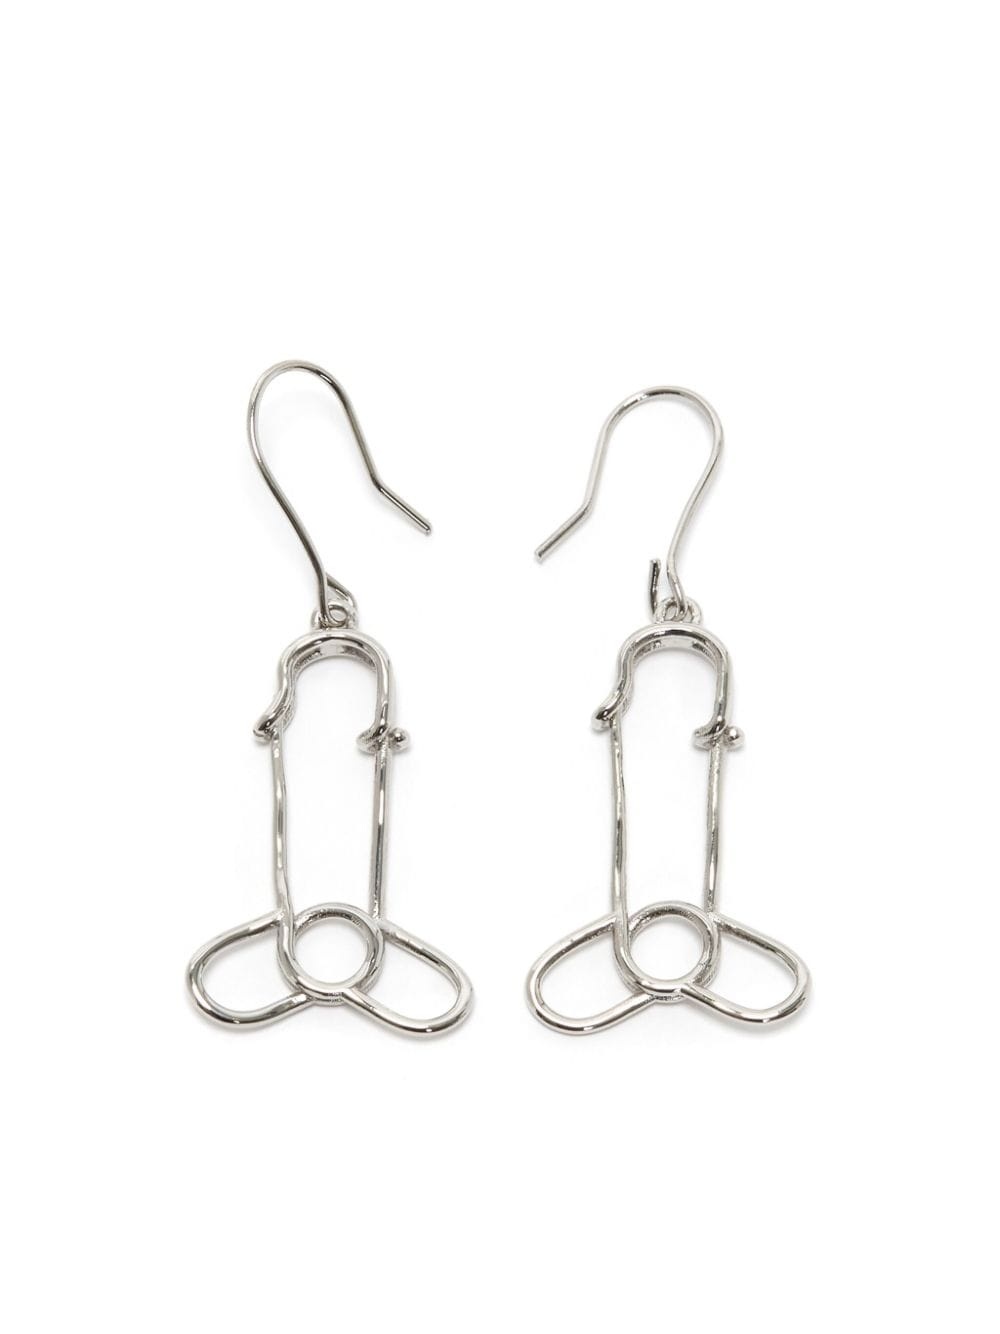 safety-pin pendant earrings - 1